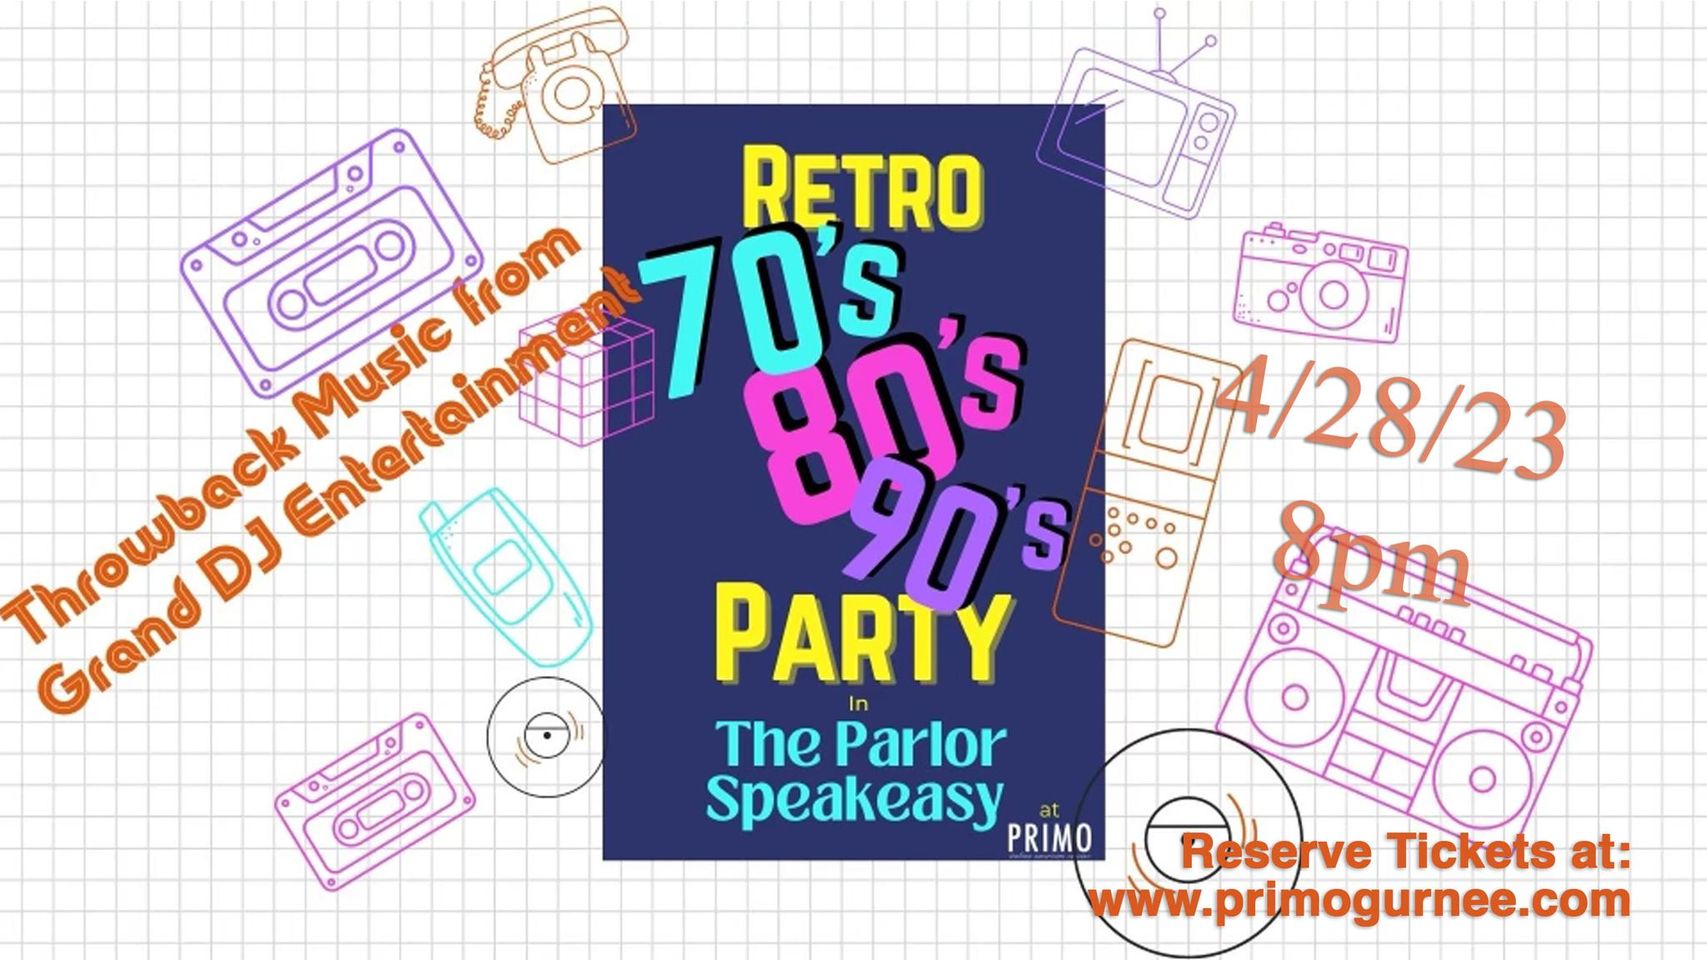 Retro Dance Party in The Parlor at Primo